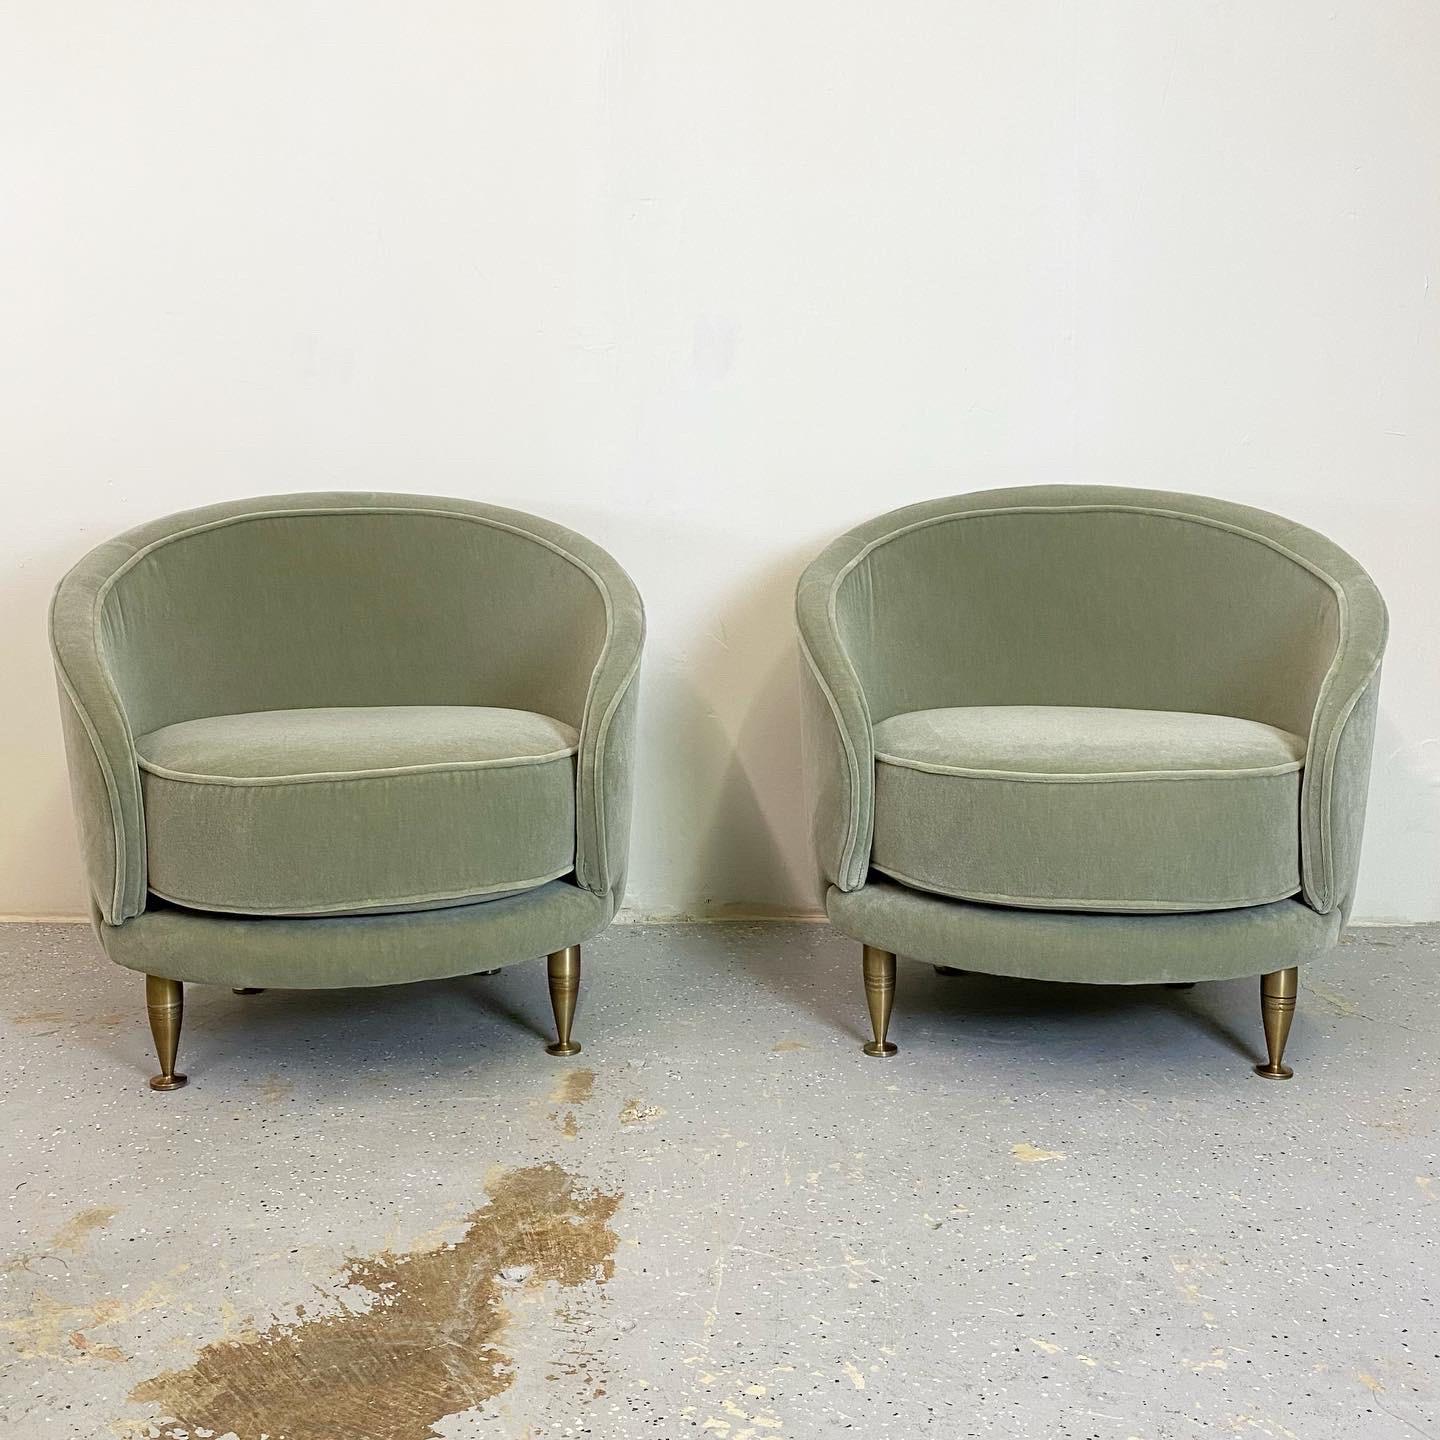 Beautiful pair of vintage Moroso lounge chairs newly upholstered in dusty seafoam mohair.